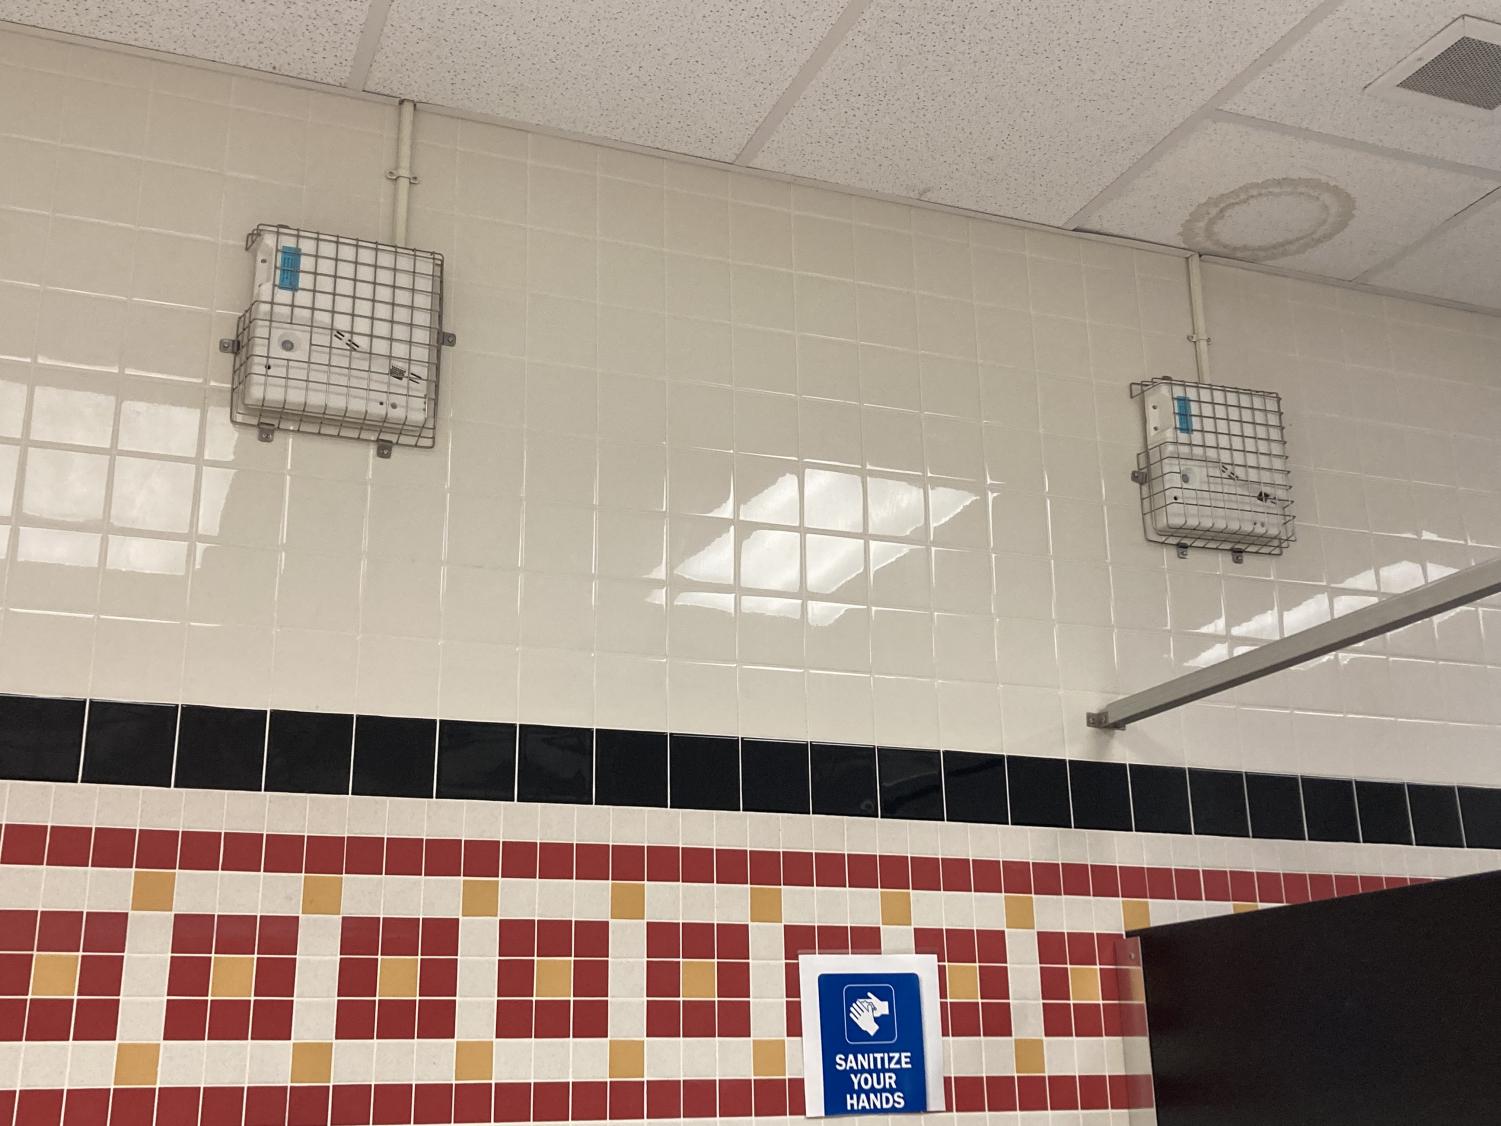 Vaping detectors have been installed in the Paint Branch bathrooms.